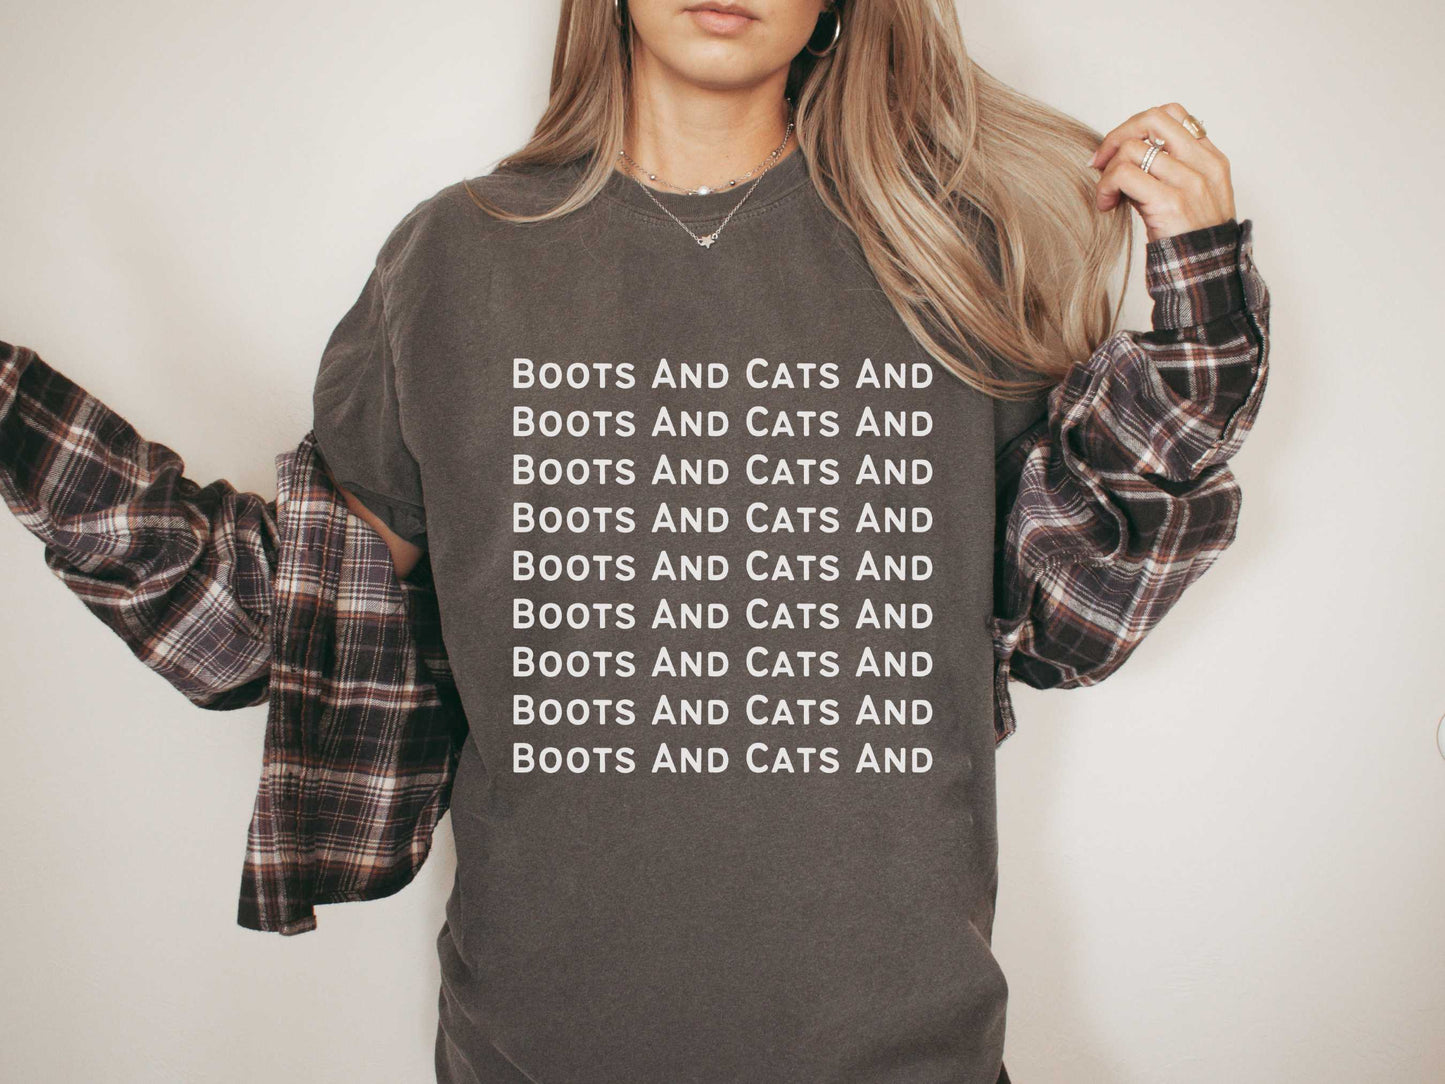 Funny Beatboxing "Boots And Cats" T-Shirt in Pepper